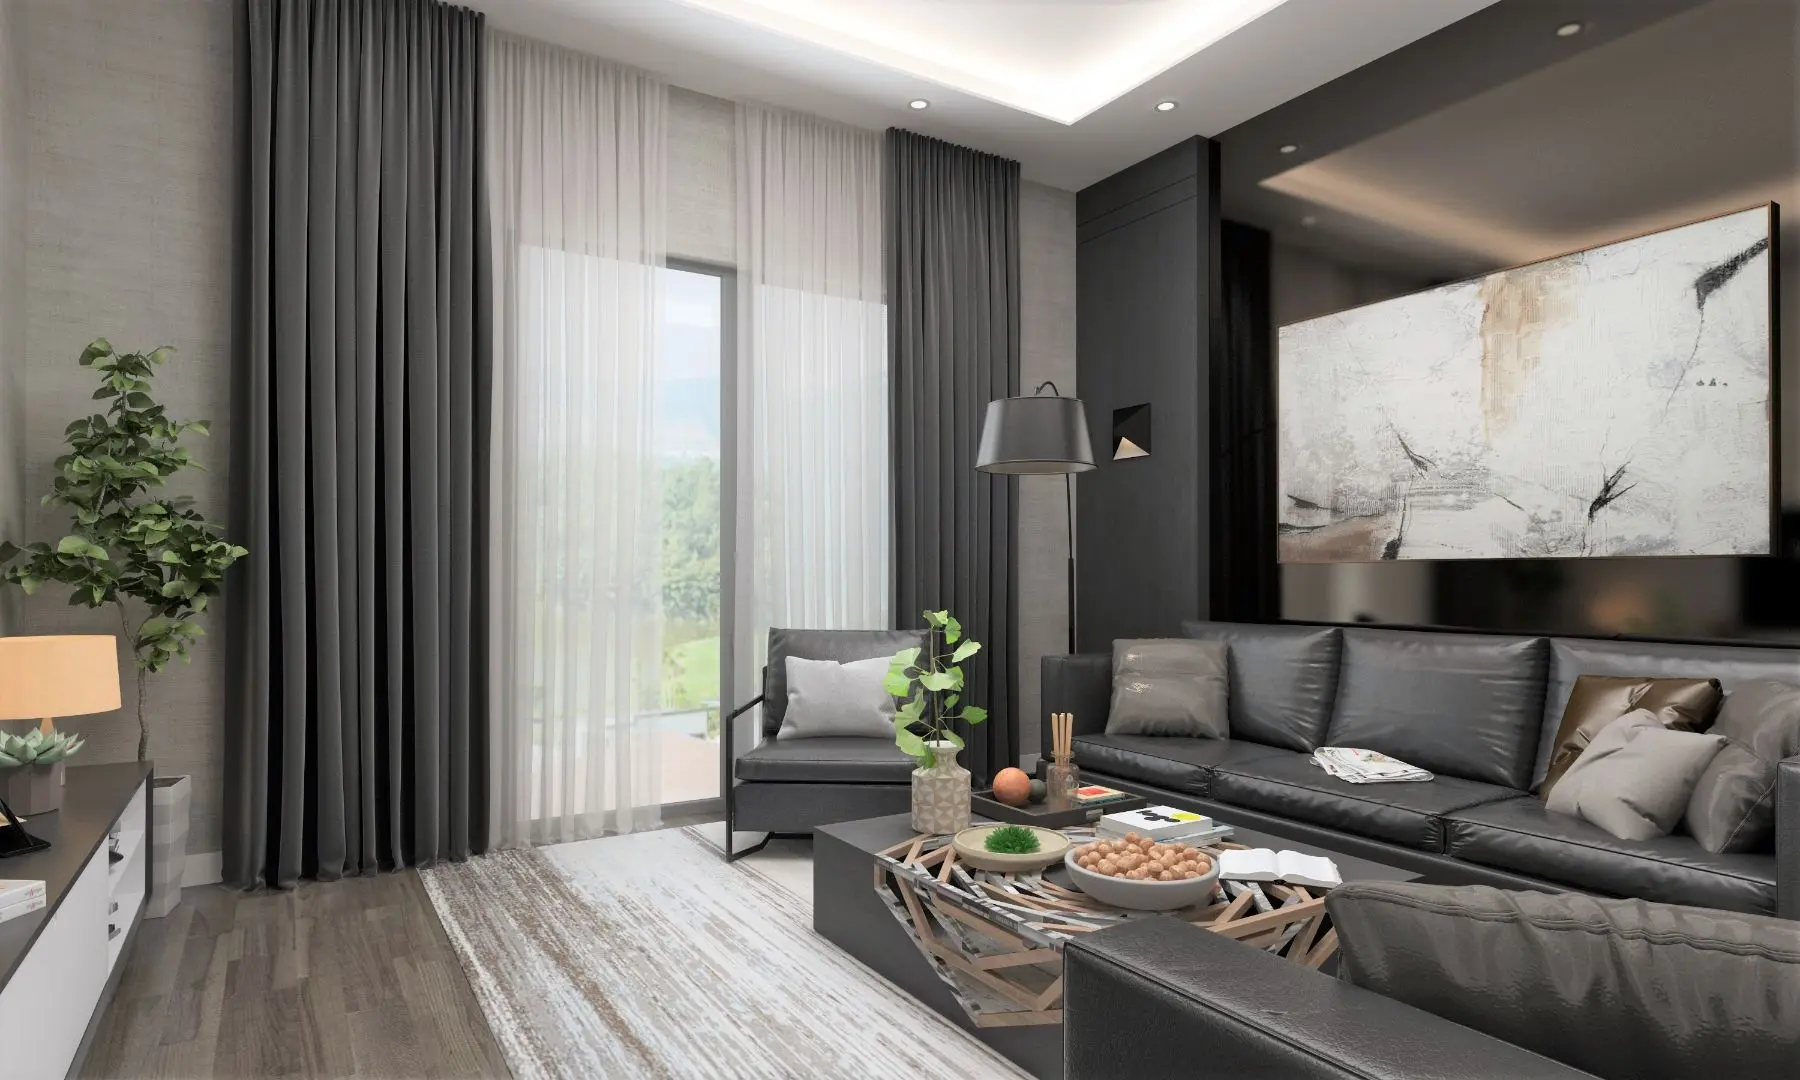 NEW LUXURIOUS PROJECT AREA WITH ALANYA VIEW